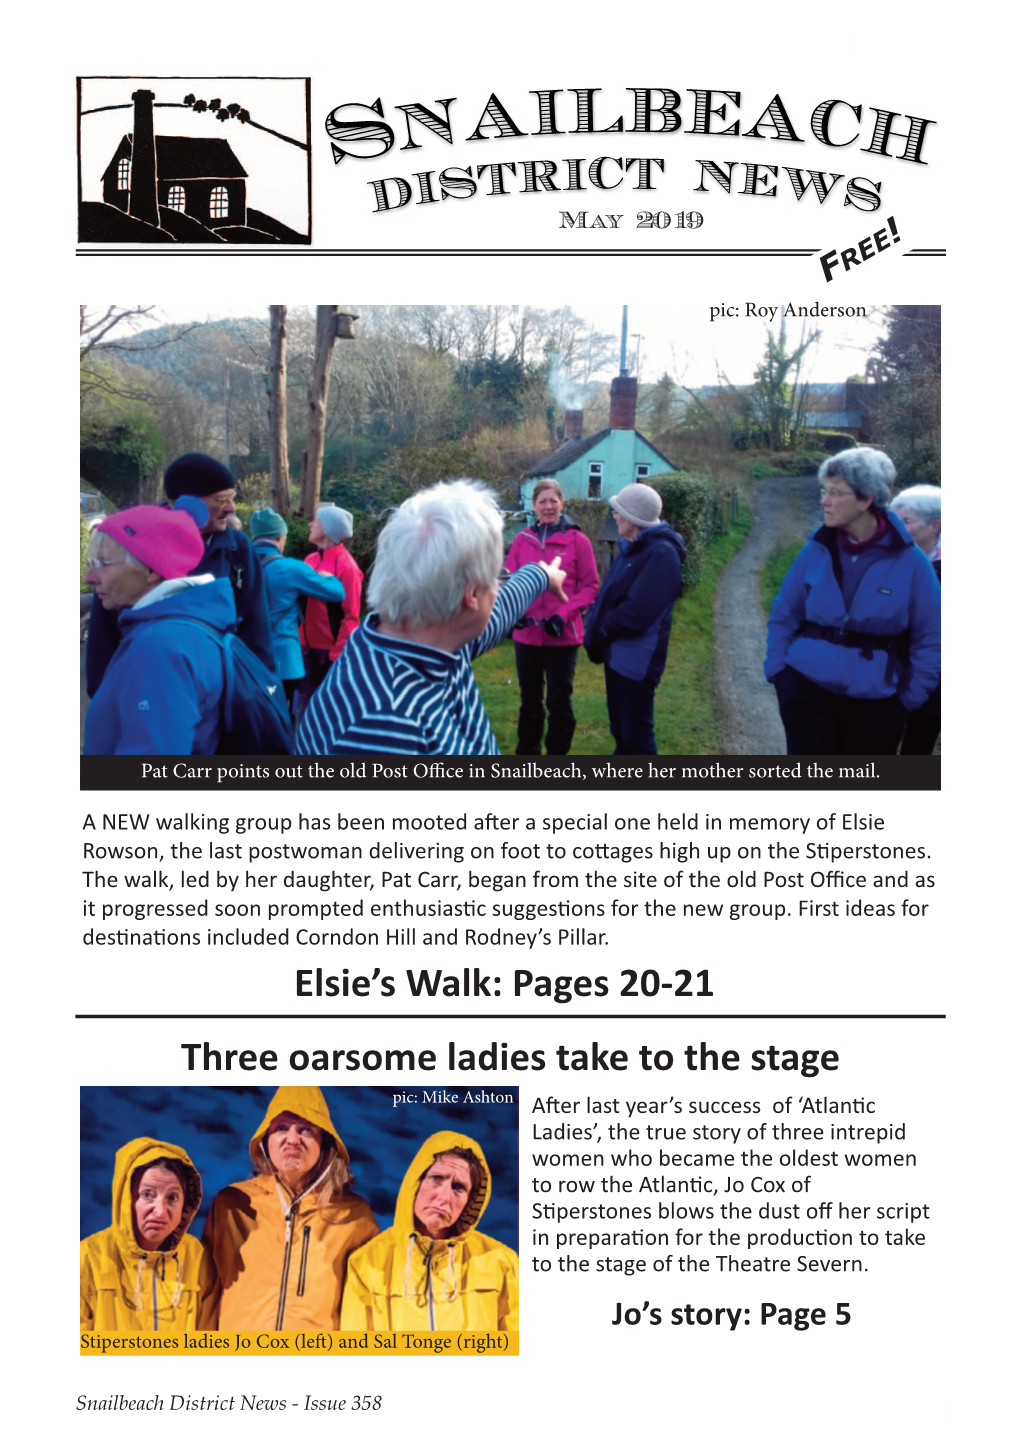 Elsie's Walk: Pages 20-21 Three Oarsome Ladies Take to the Stage